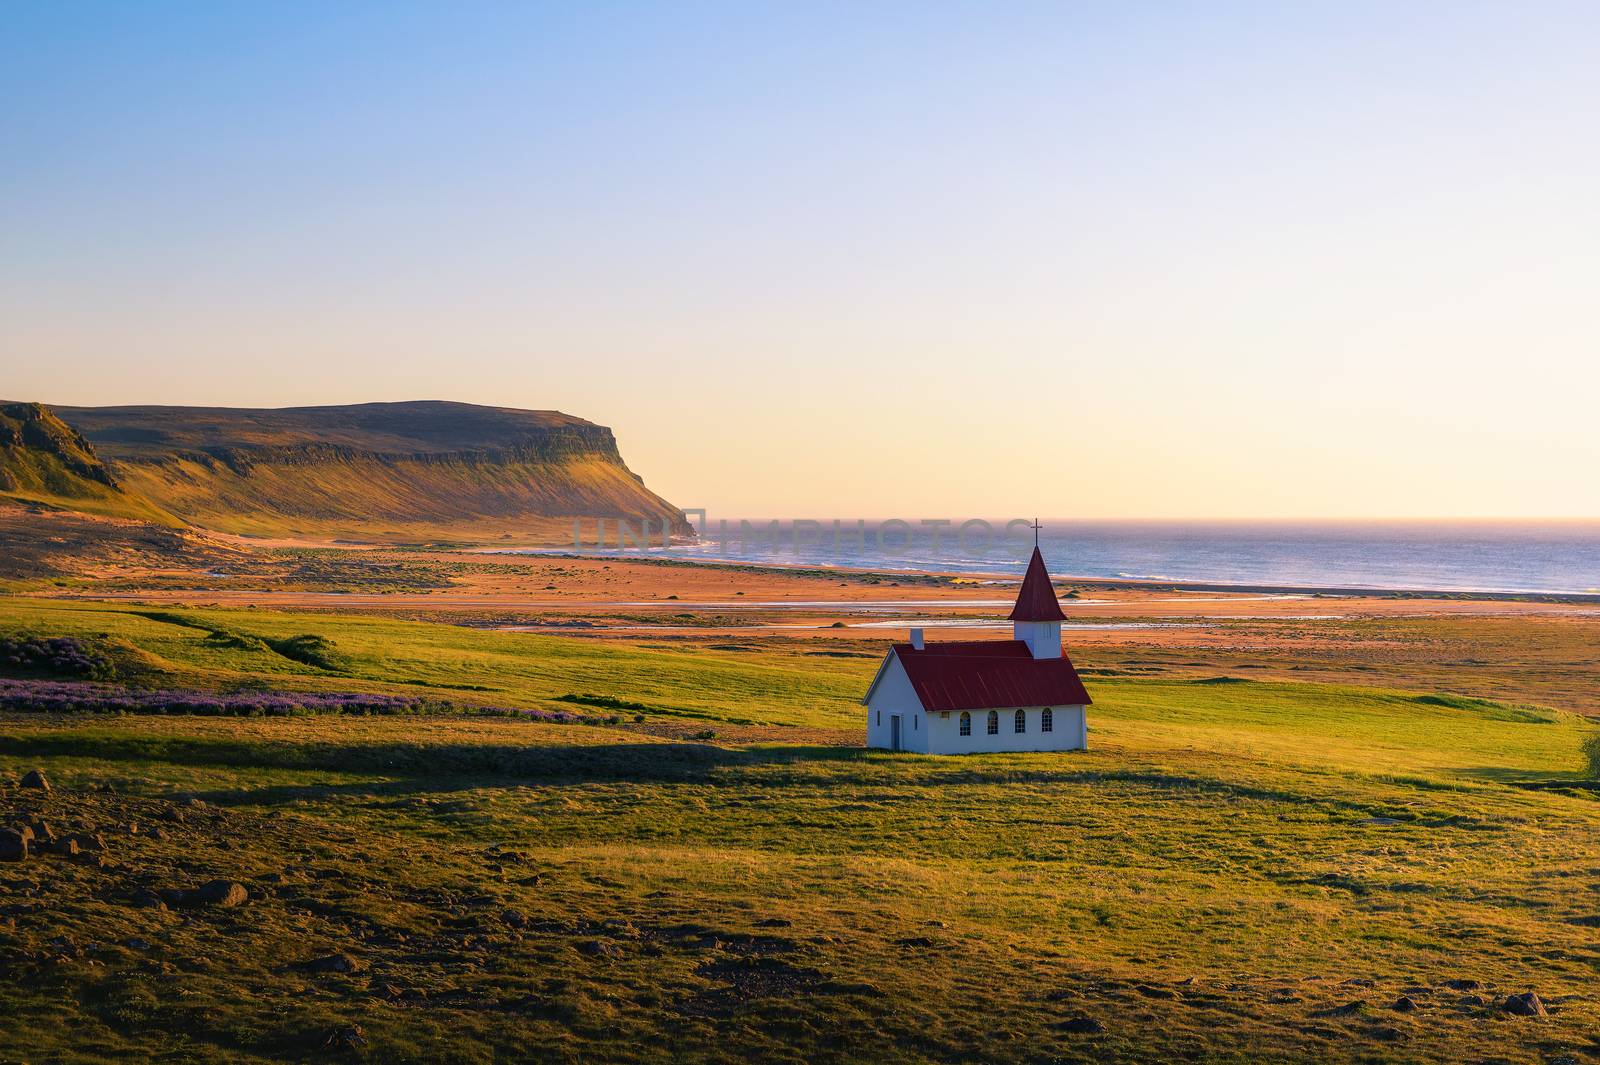 Sunset at the Breidavik church in Westfjords, Iceland by nickfox